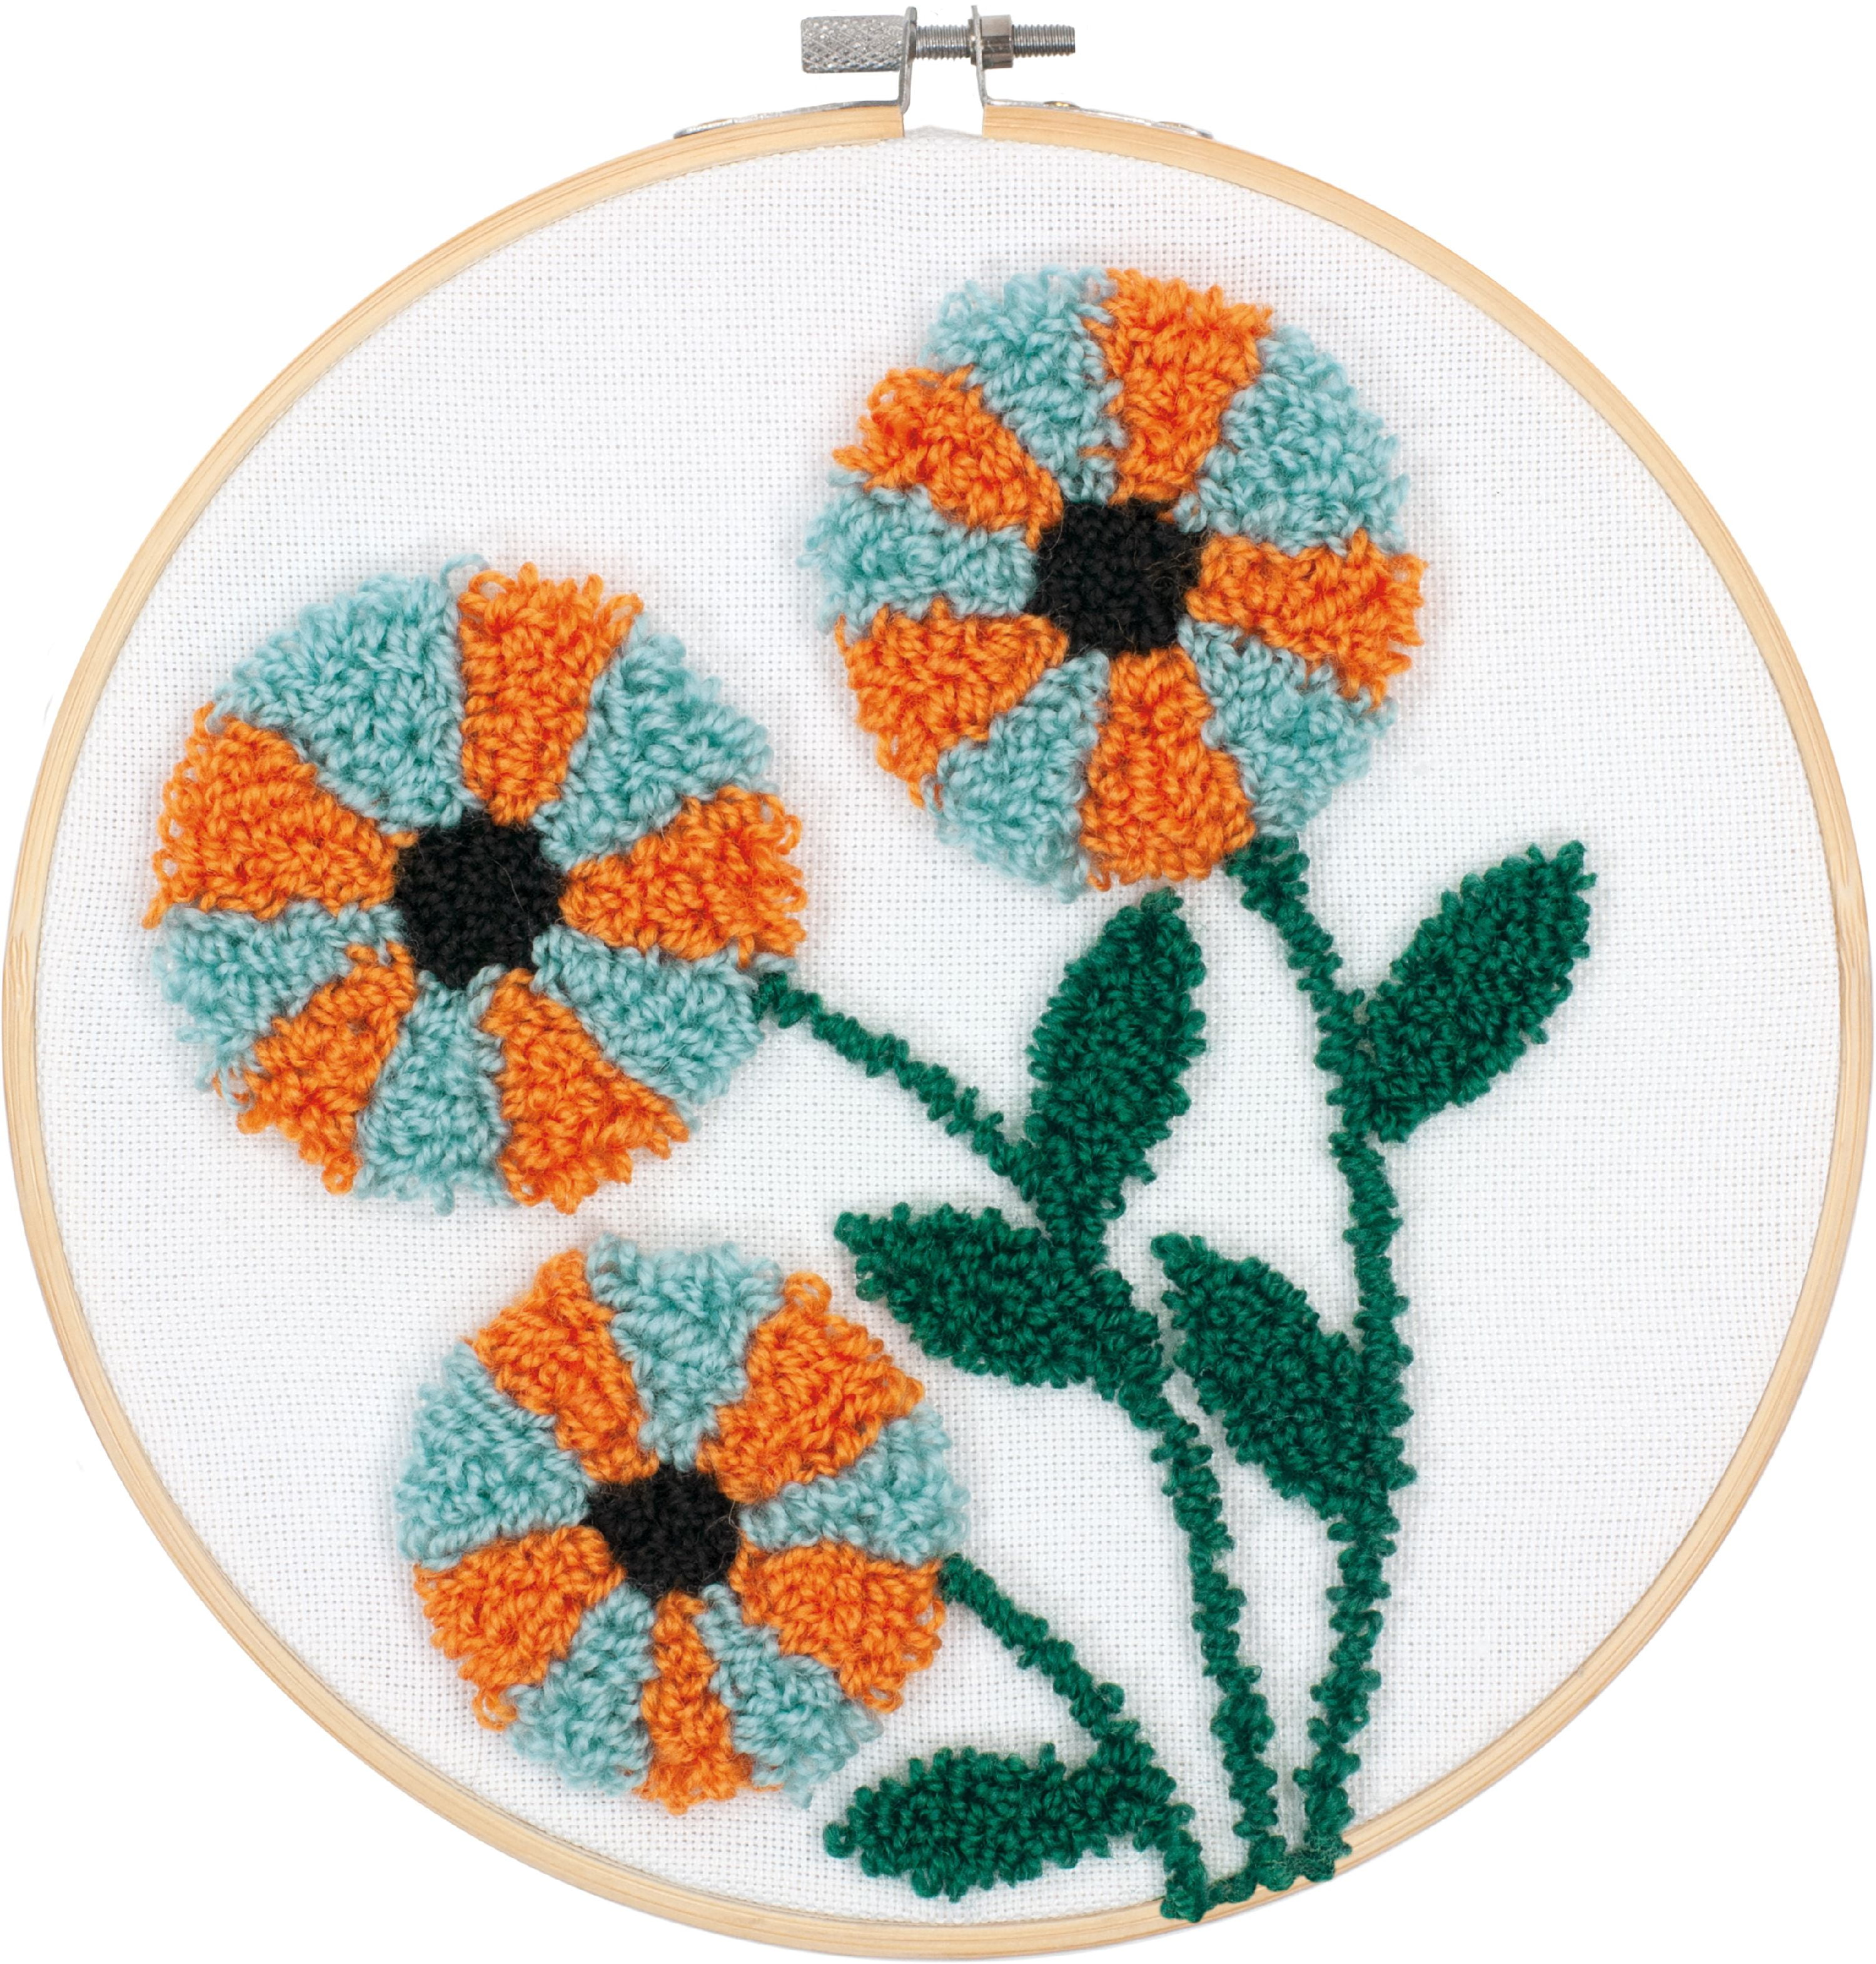 Square Punch Needle Kit - Fall Floral and Vines - Stitched Modern